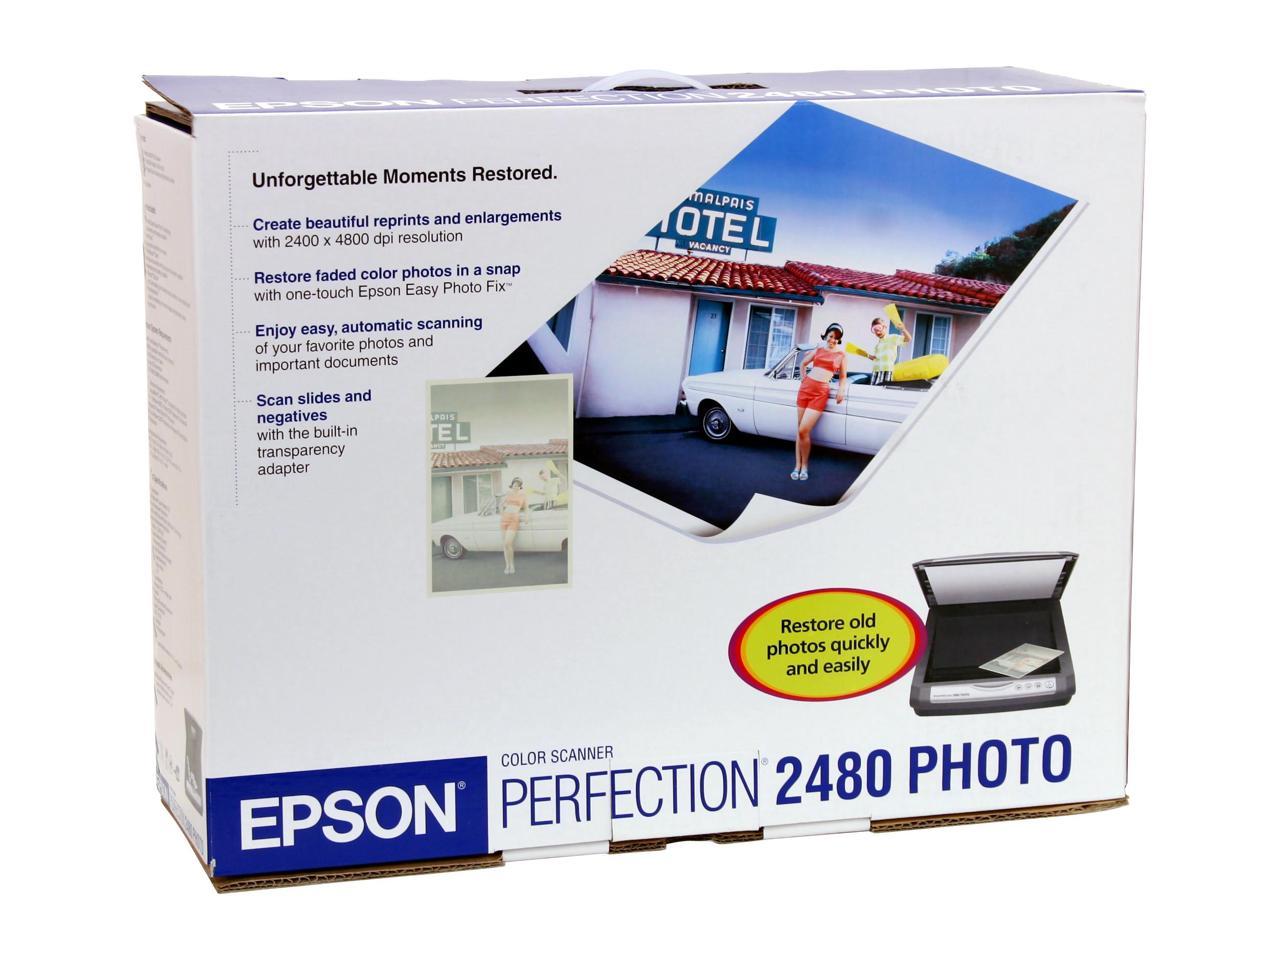 Epson Perfection 2480 Pro Flatbed Scanner 5749